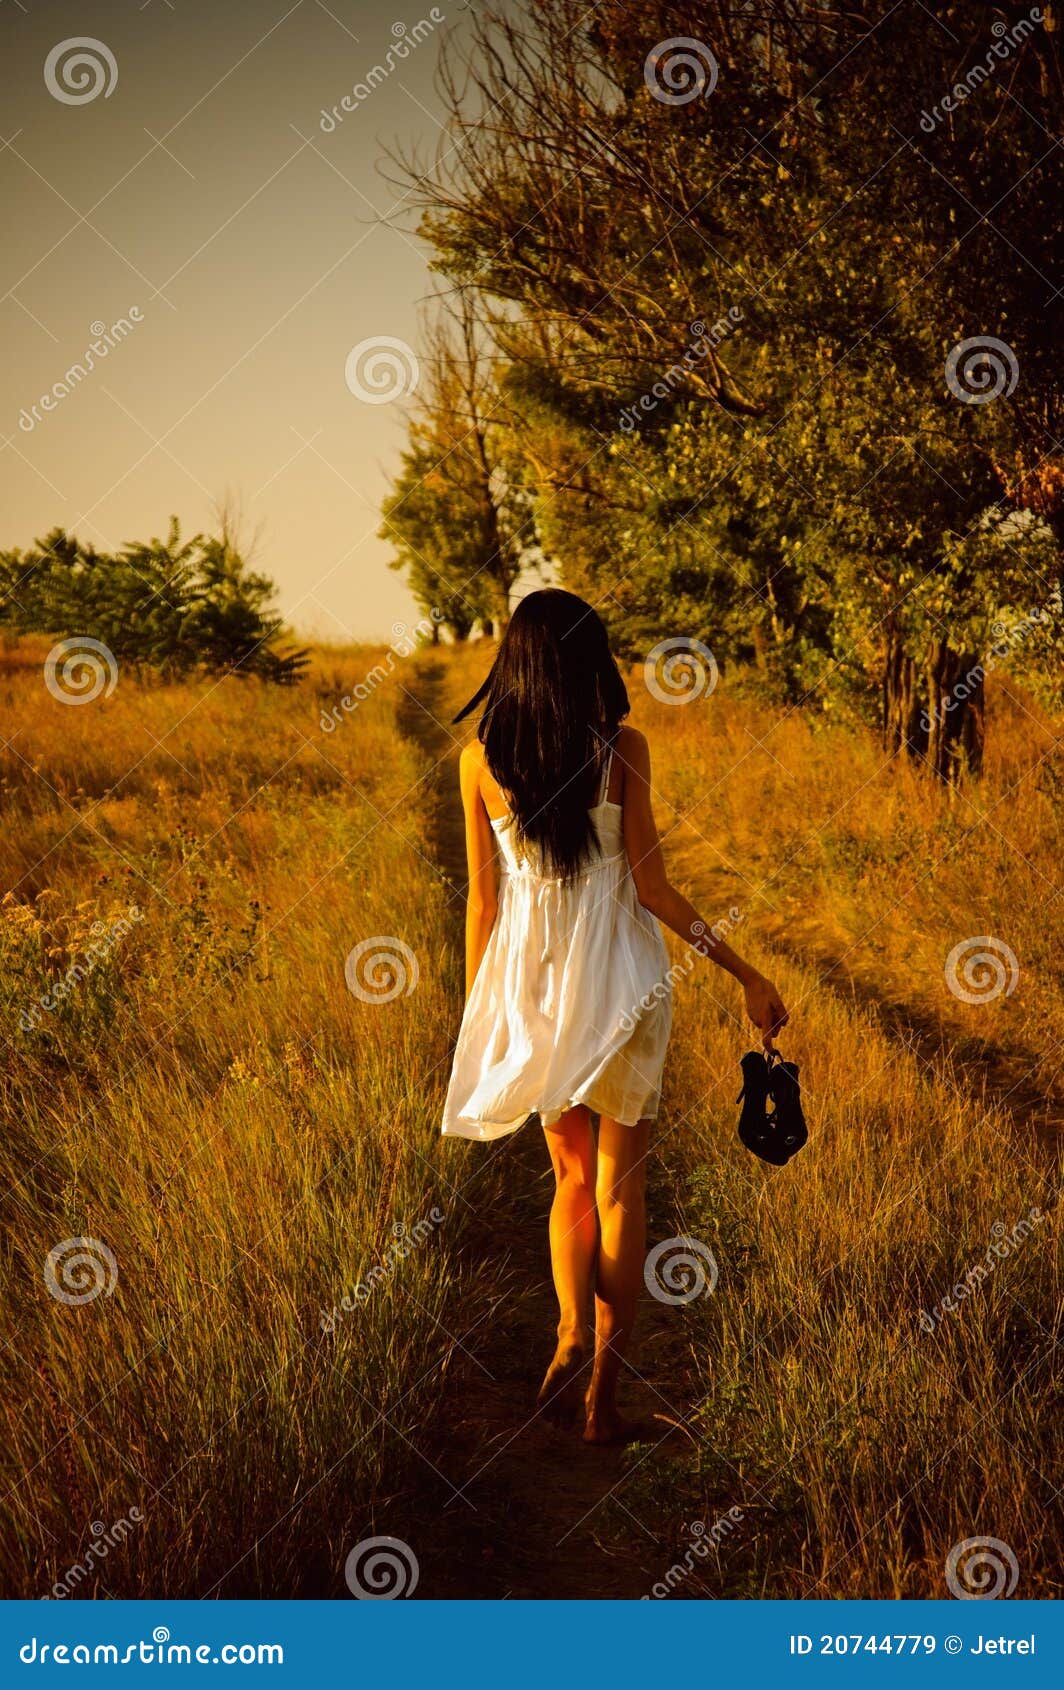 Barefoot Girl In White Dress Is On The Field Royalty Free 